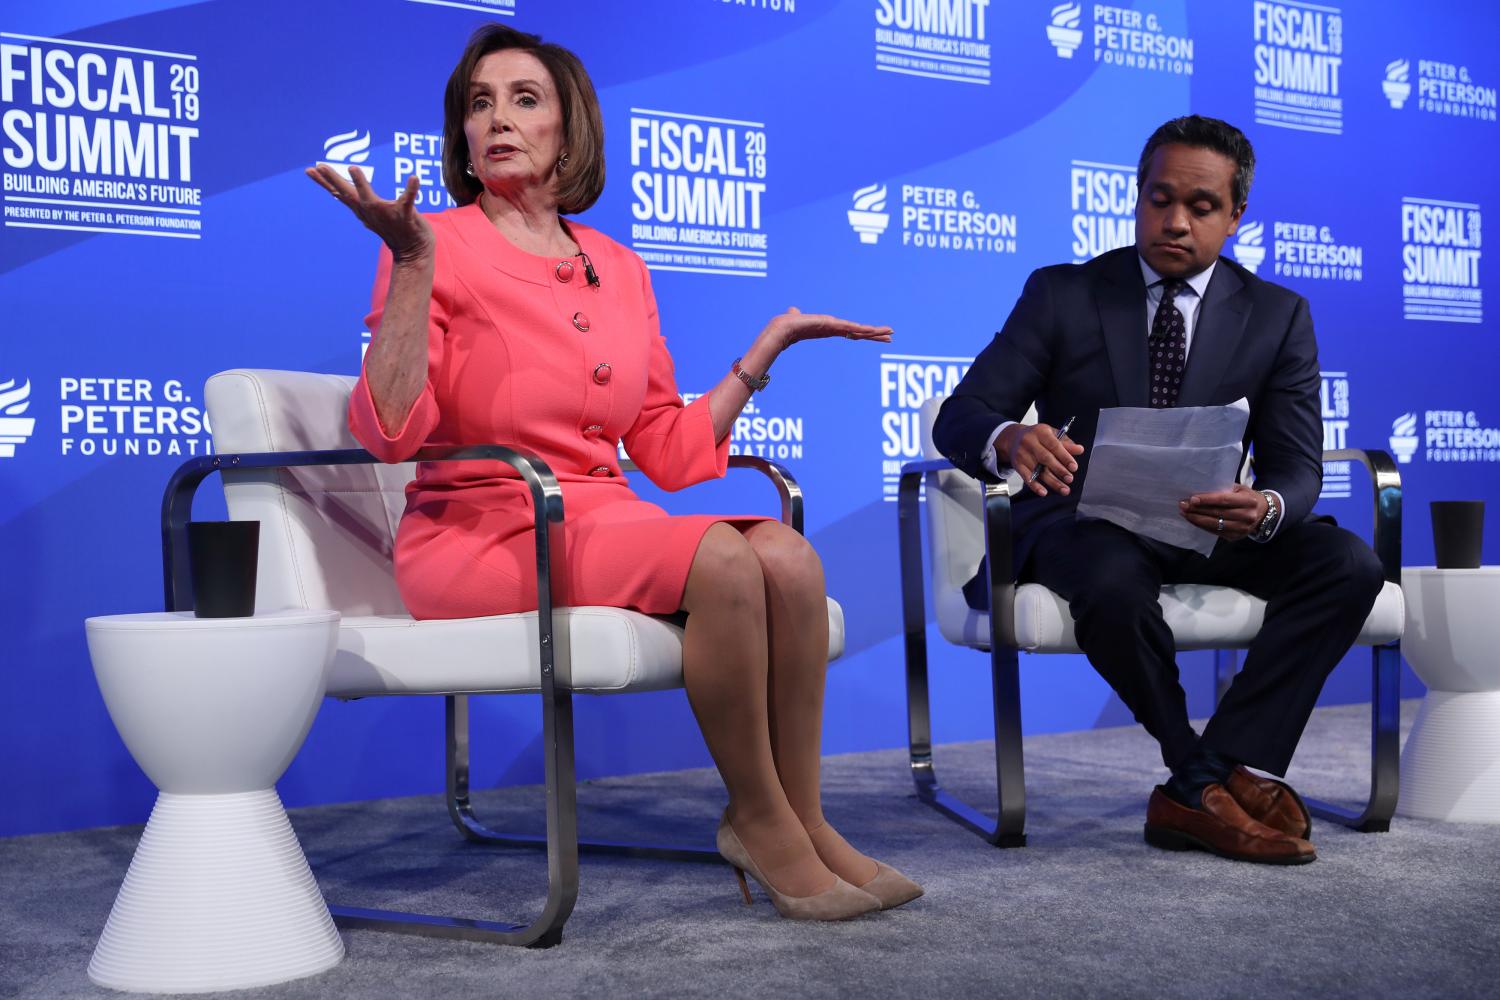 U.S. House Speaker Nancy Pelosi (D-CA) sits for an onstage interview about the U.S. budget with CNN reporter Manu Raju at the Peterson Foundation's annual Fiscal Summit in Washington, U.S. June 11, 2019.  REUTERS/Jonathan Ernst - RC19F3443080